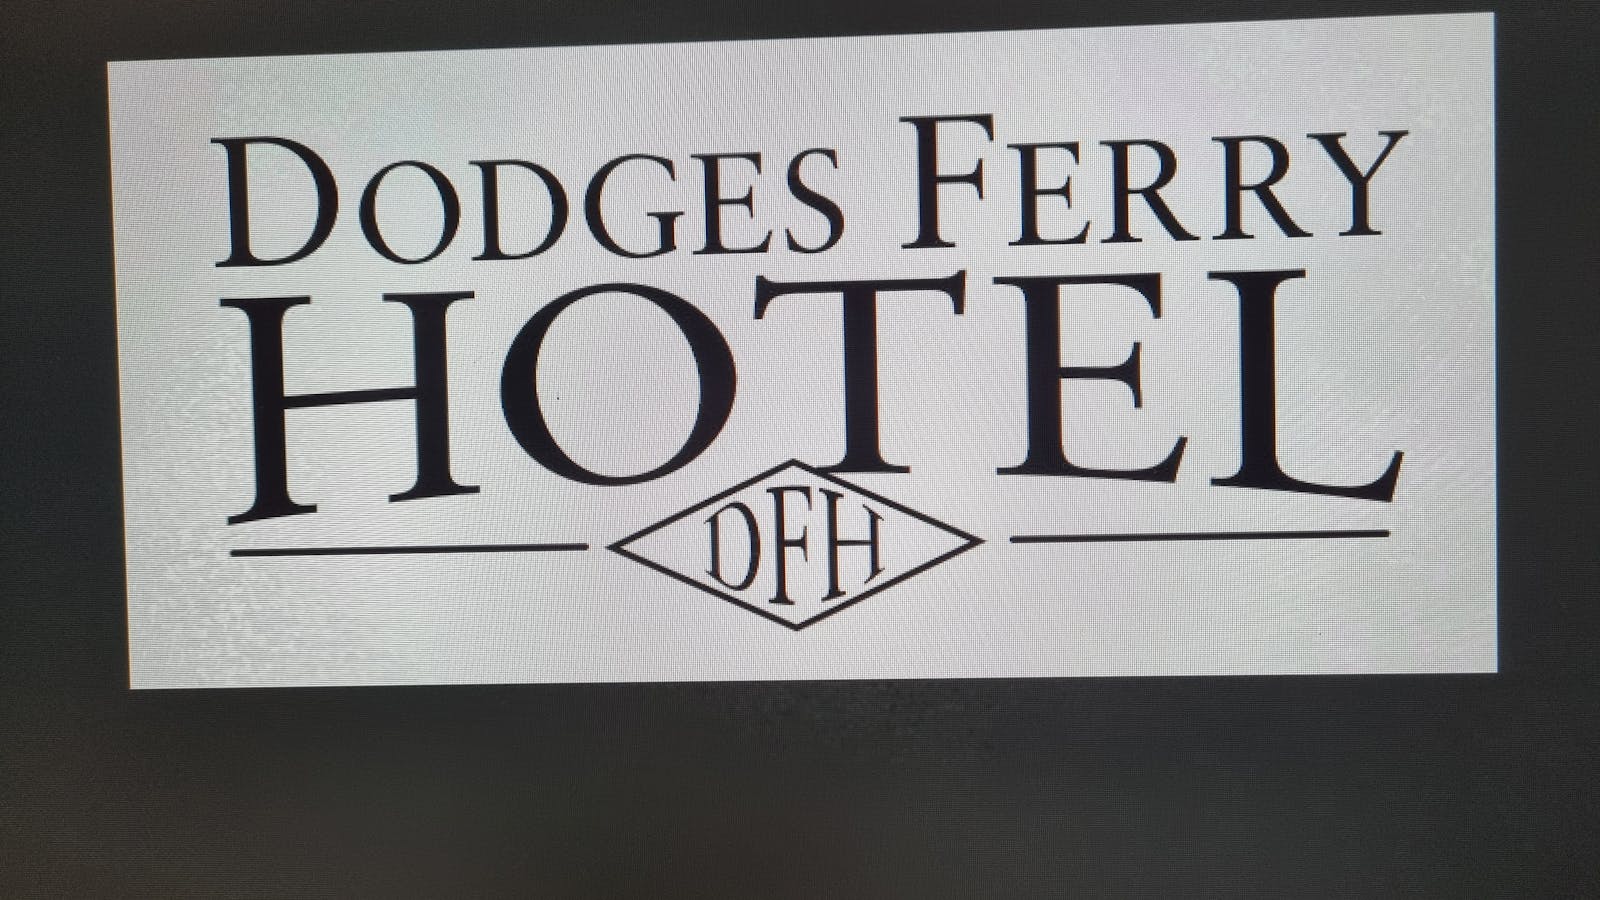 Dodges Ferry Hotel